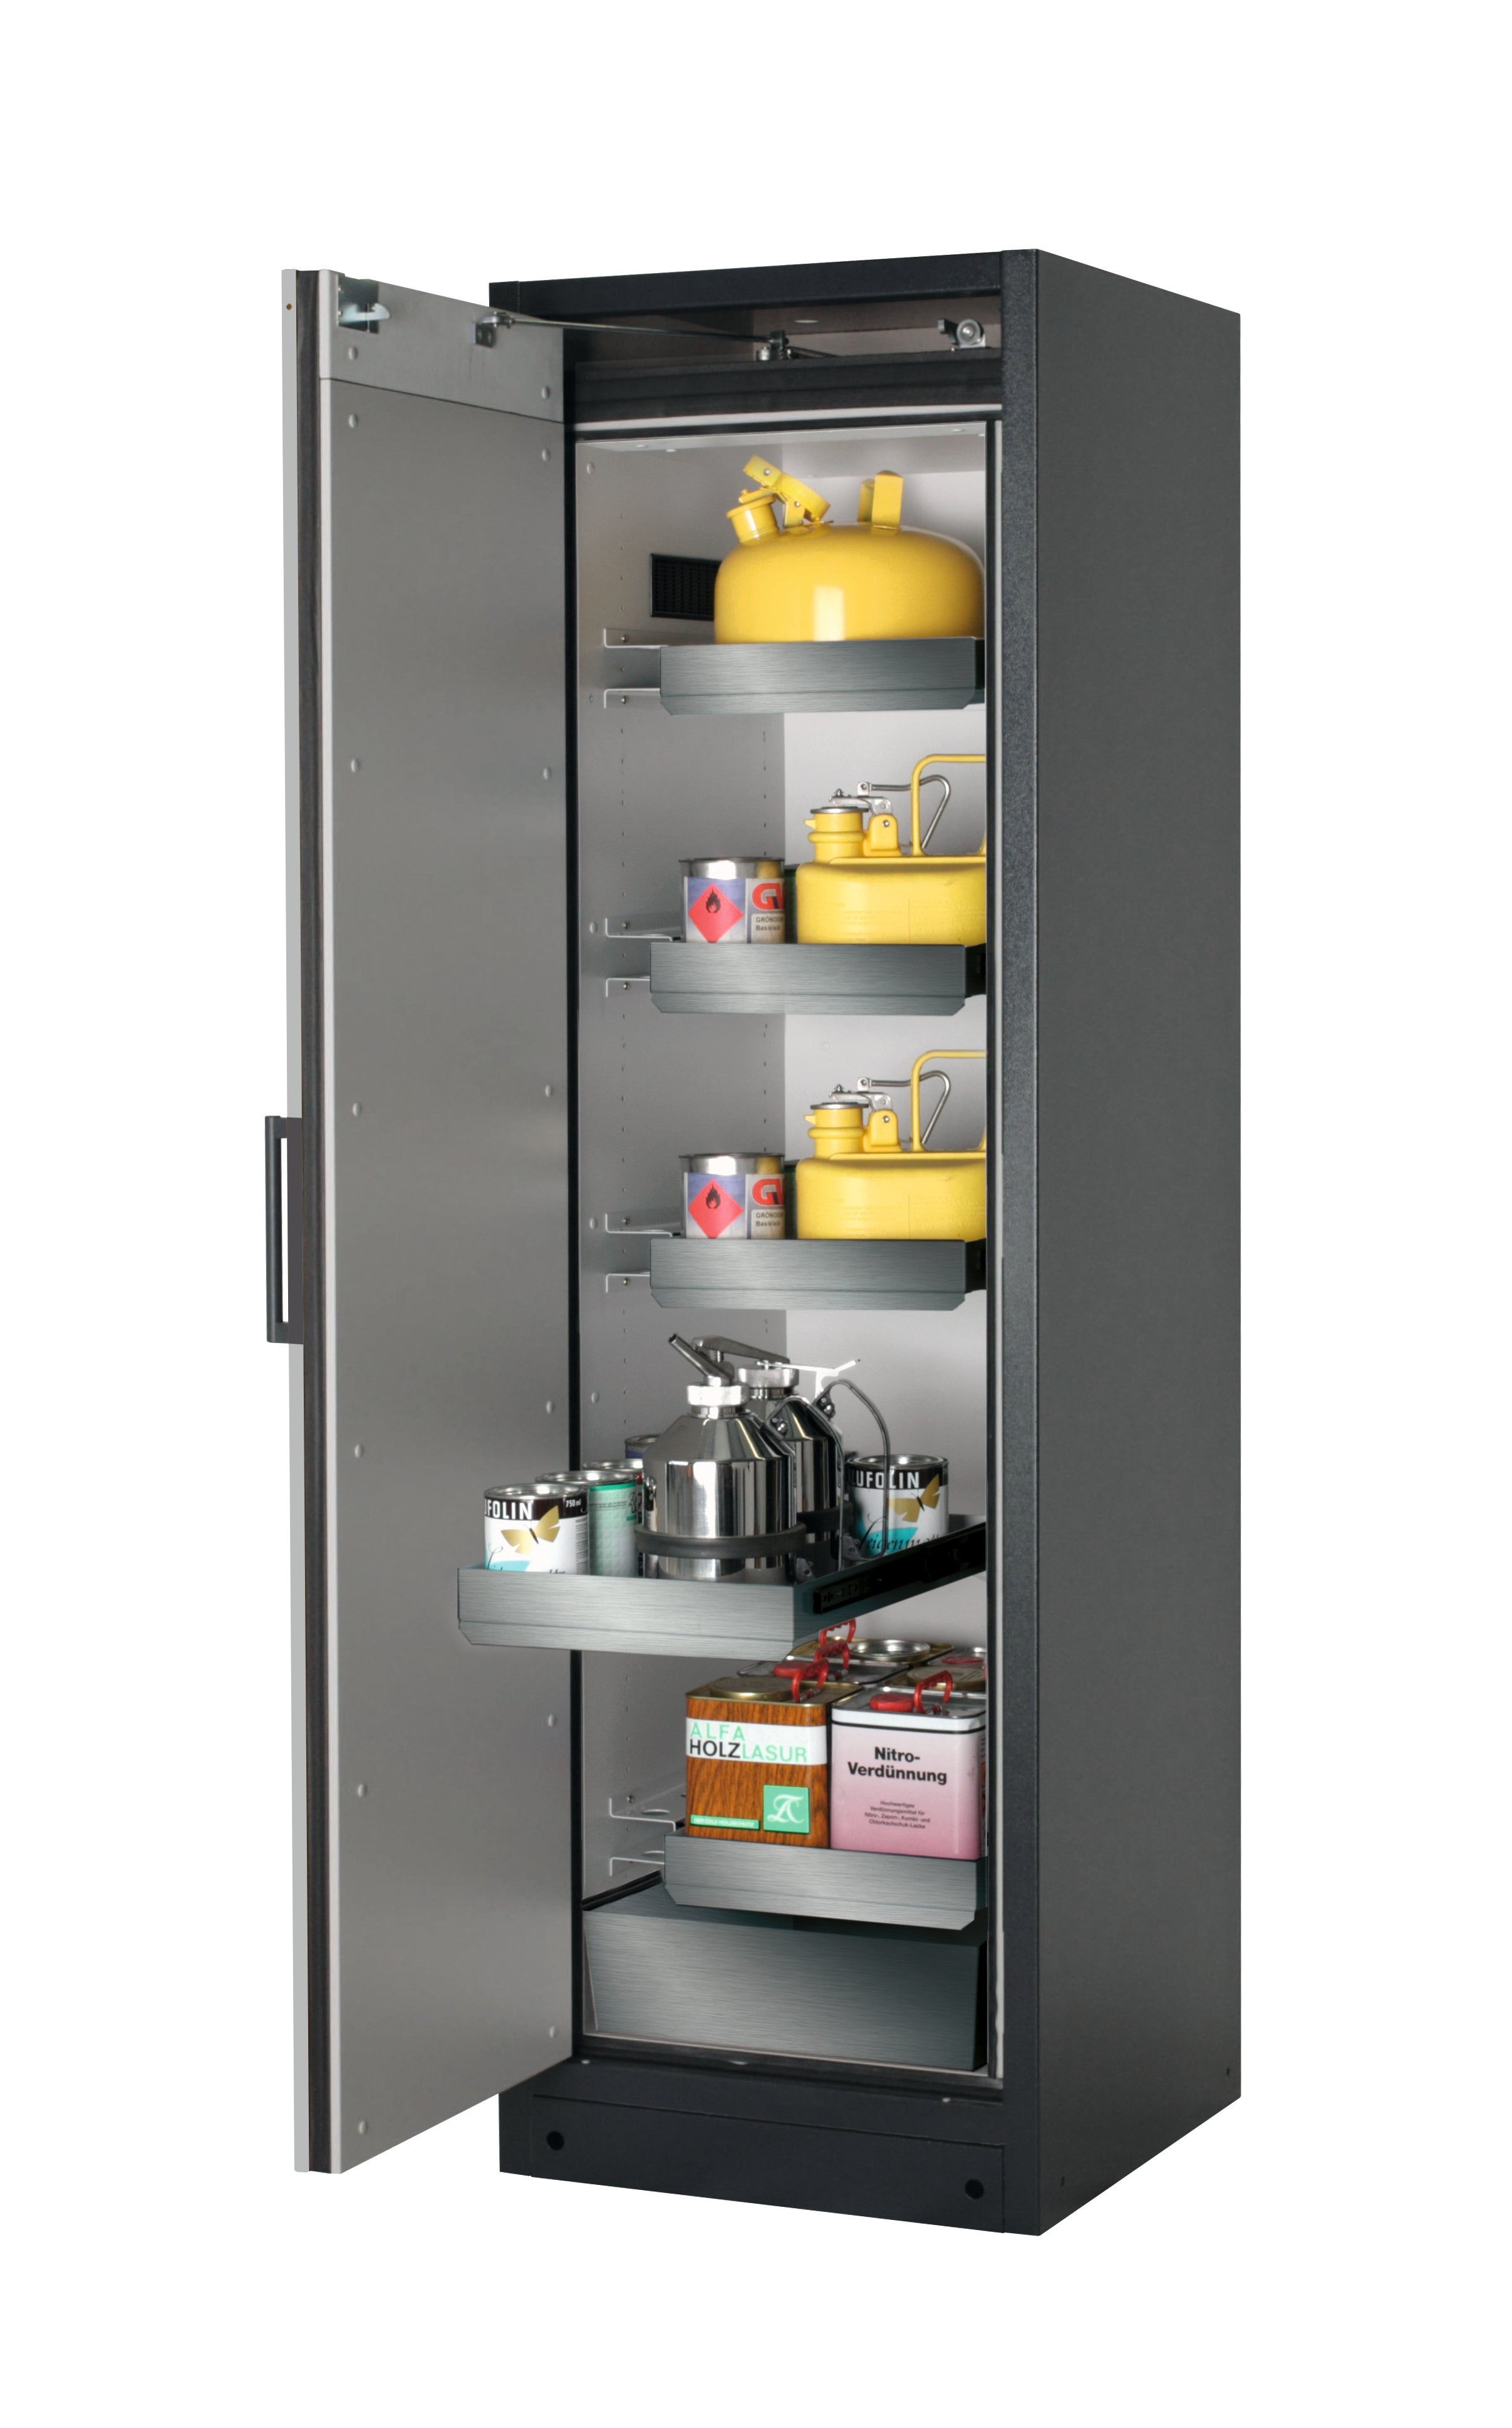 Type 90 safety storage cabinet Q-CLASSIC-90 model Q90.195.060 in pure white RAL 9010 with 4x drawer (standard) (stainless steel 1.4301),